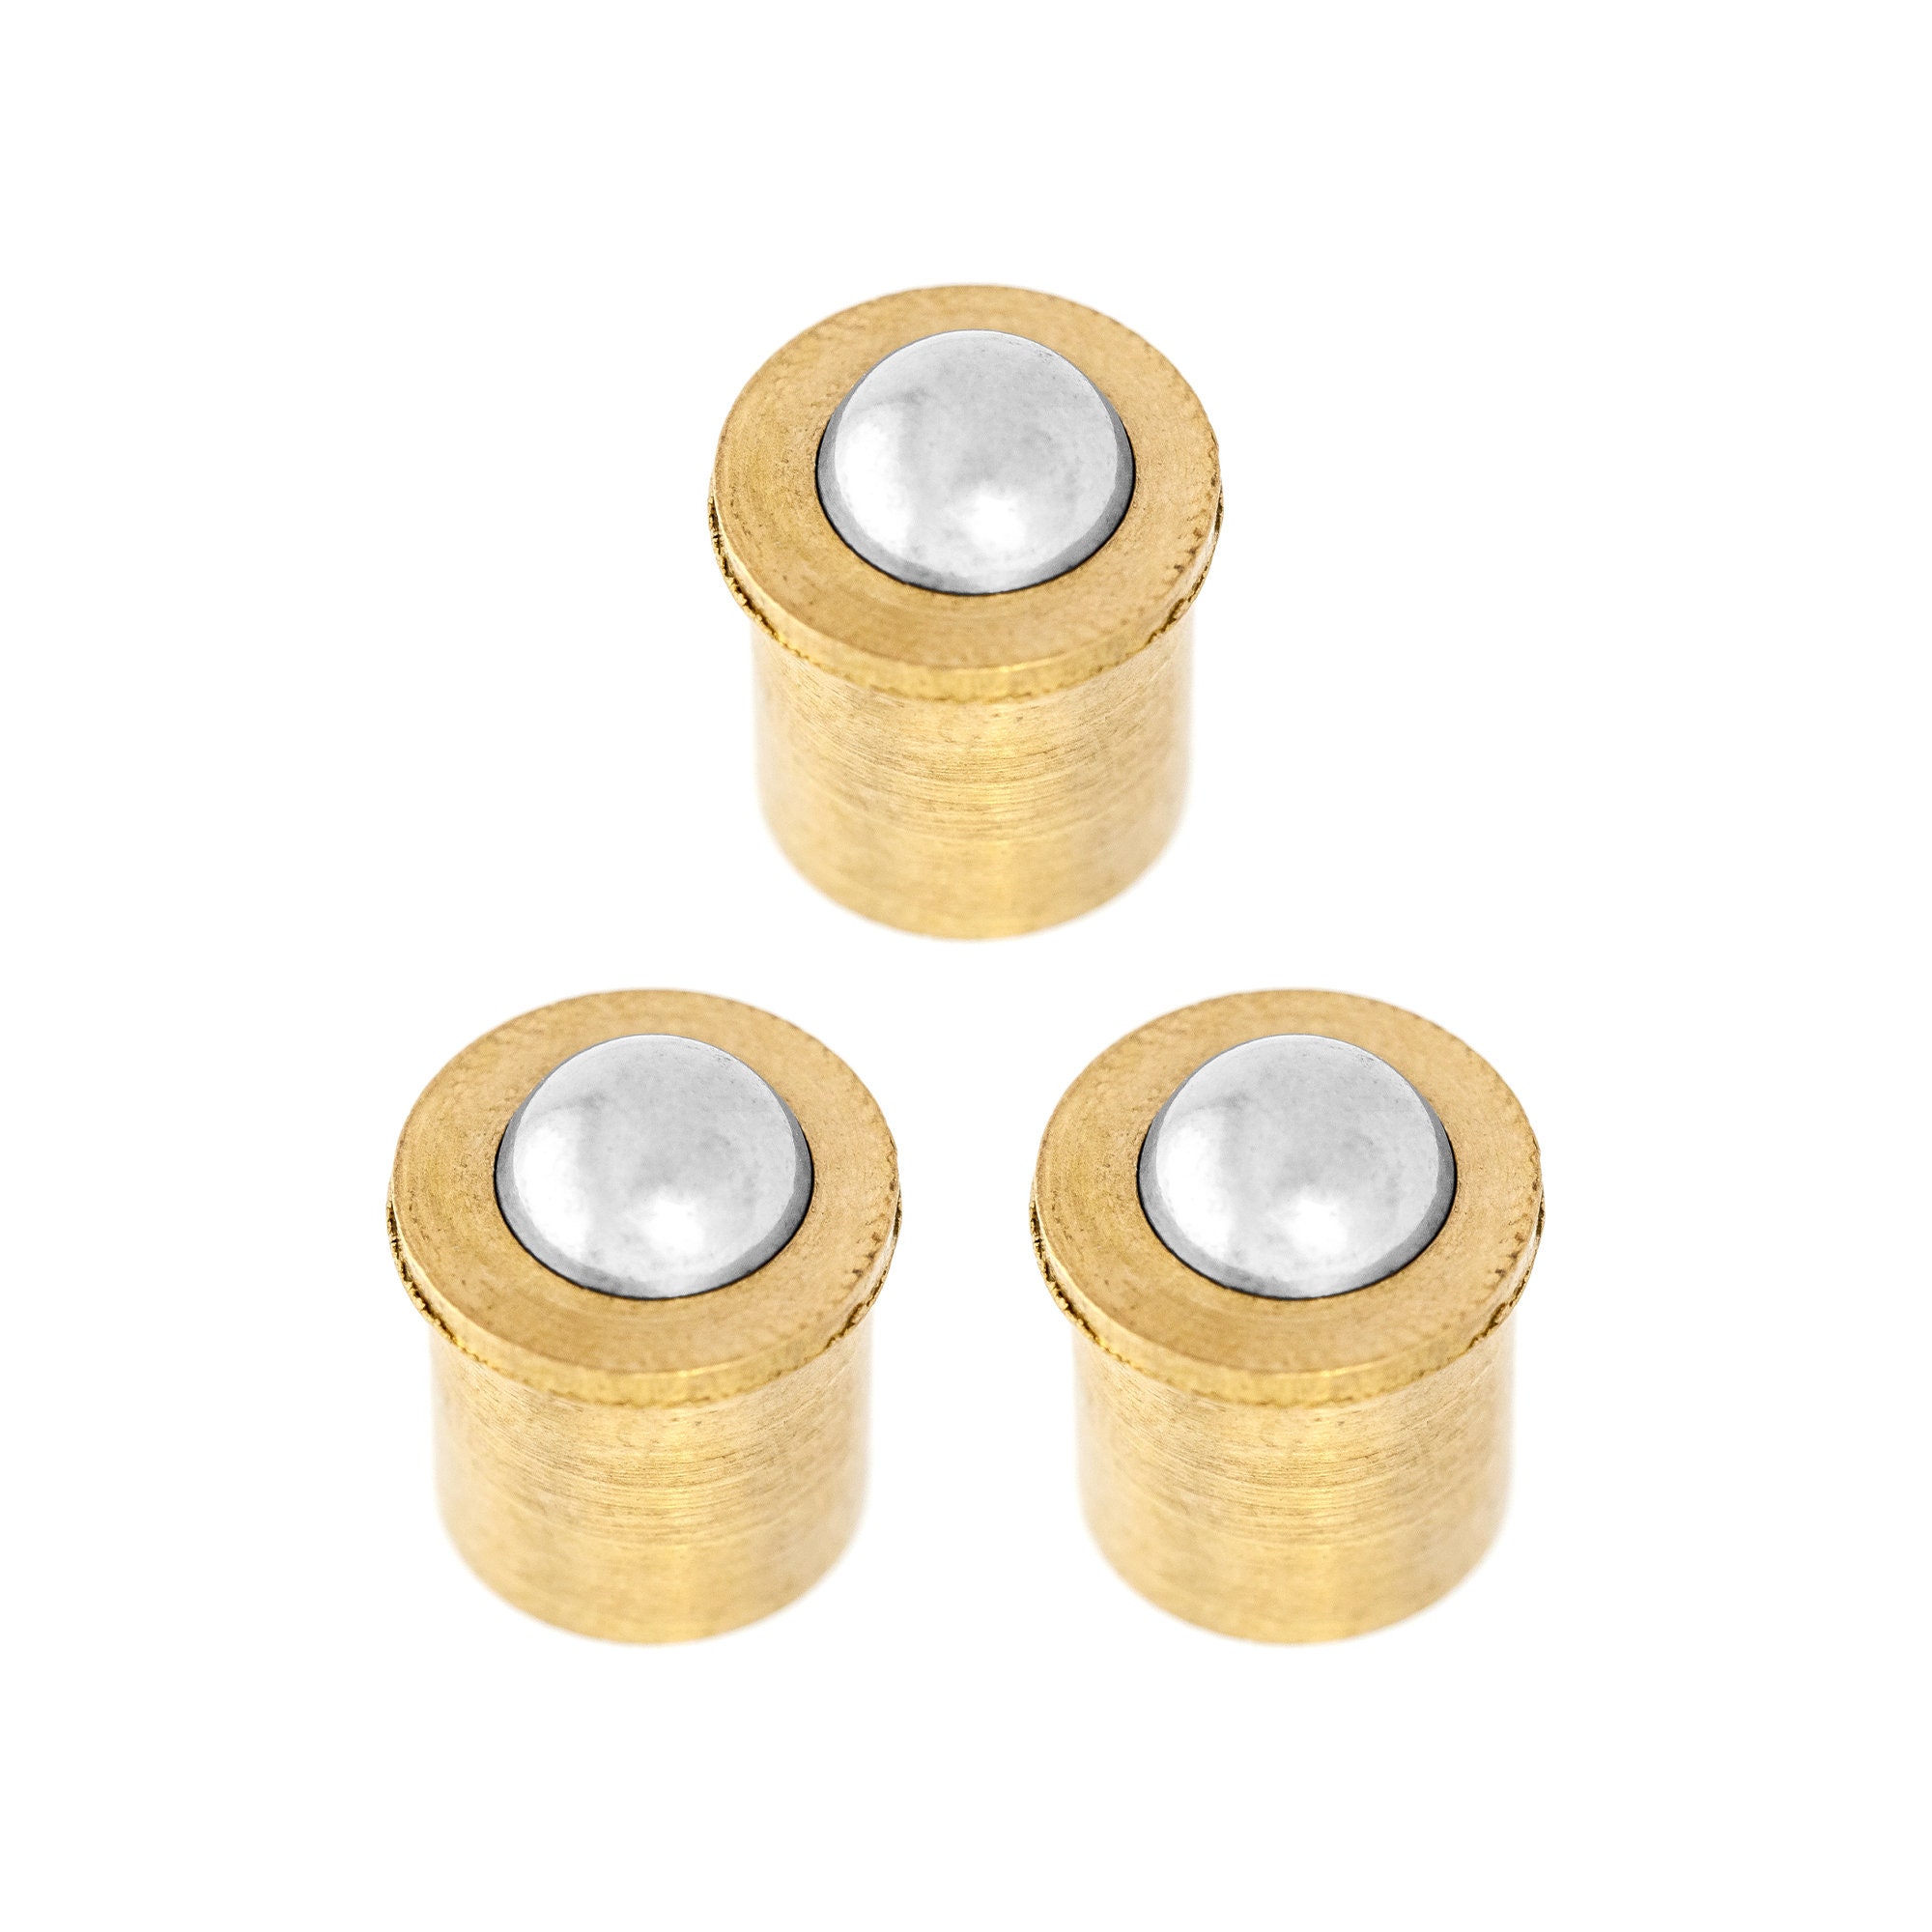 10 Locking Ball Top Tie Tac Pin Backs Clutch Clasp Fastener Gold Chrome  Police 